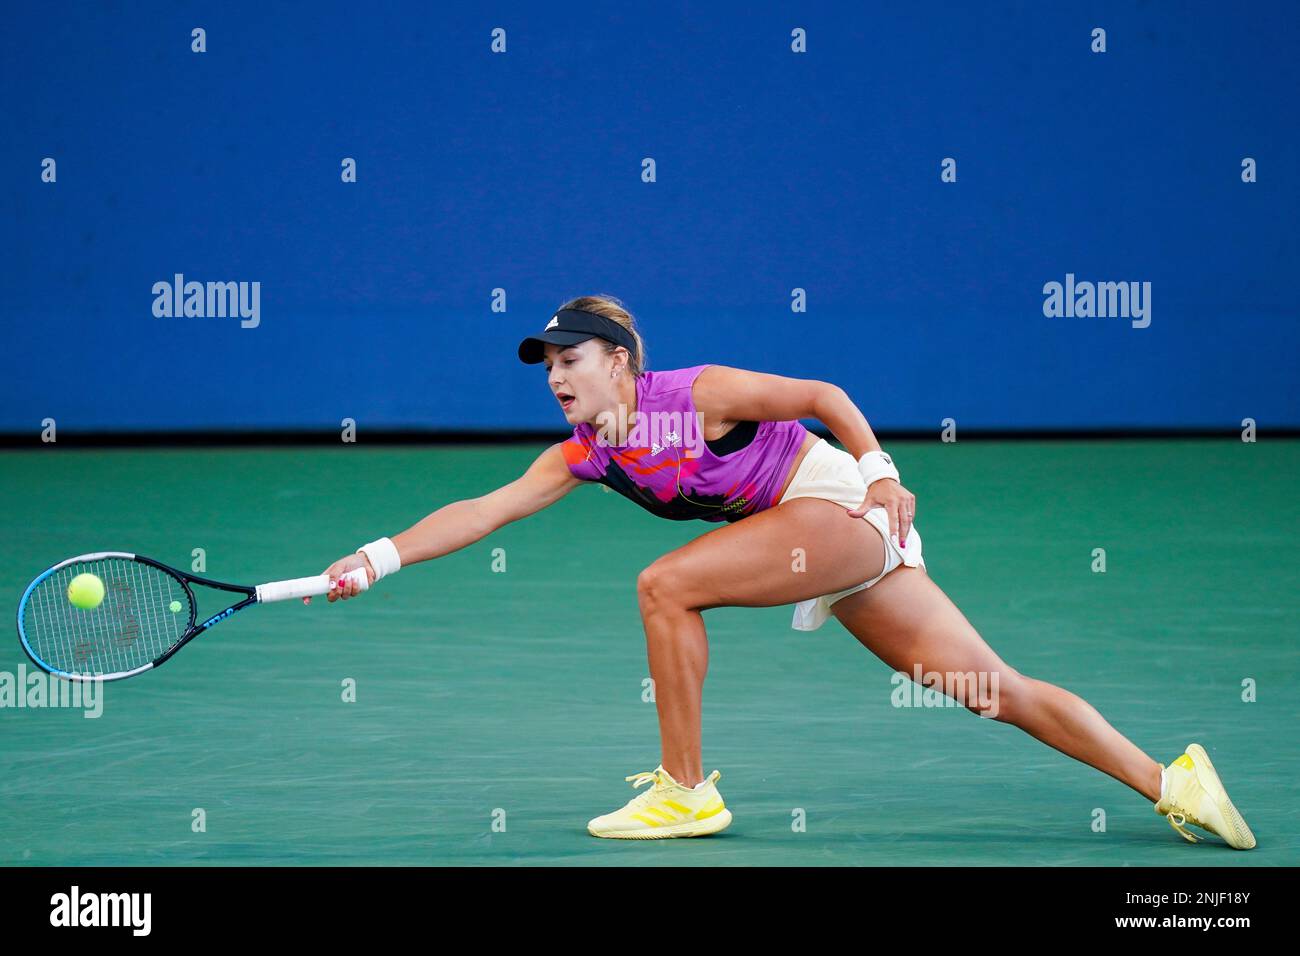 Anna Kalinskaya in action during a womens singles match at the 2022 US Open, Wednesday, Aug